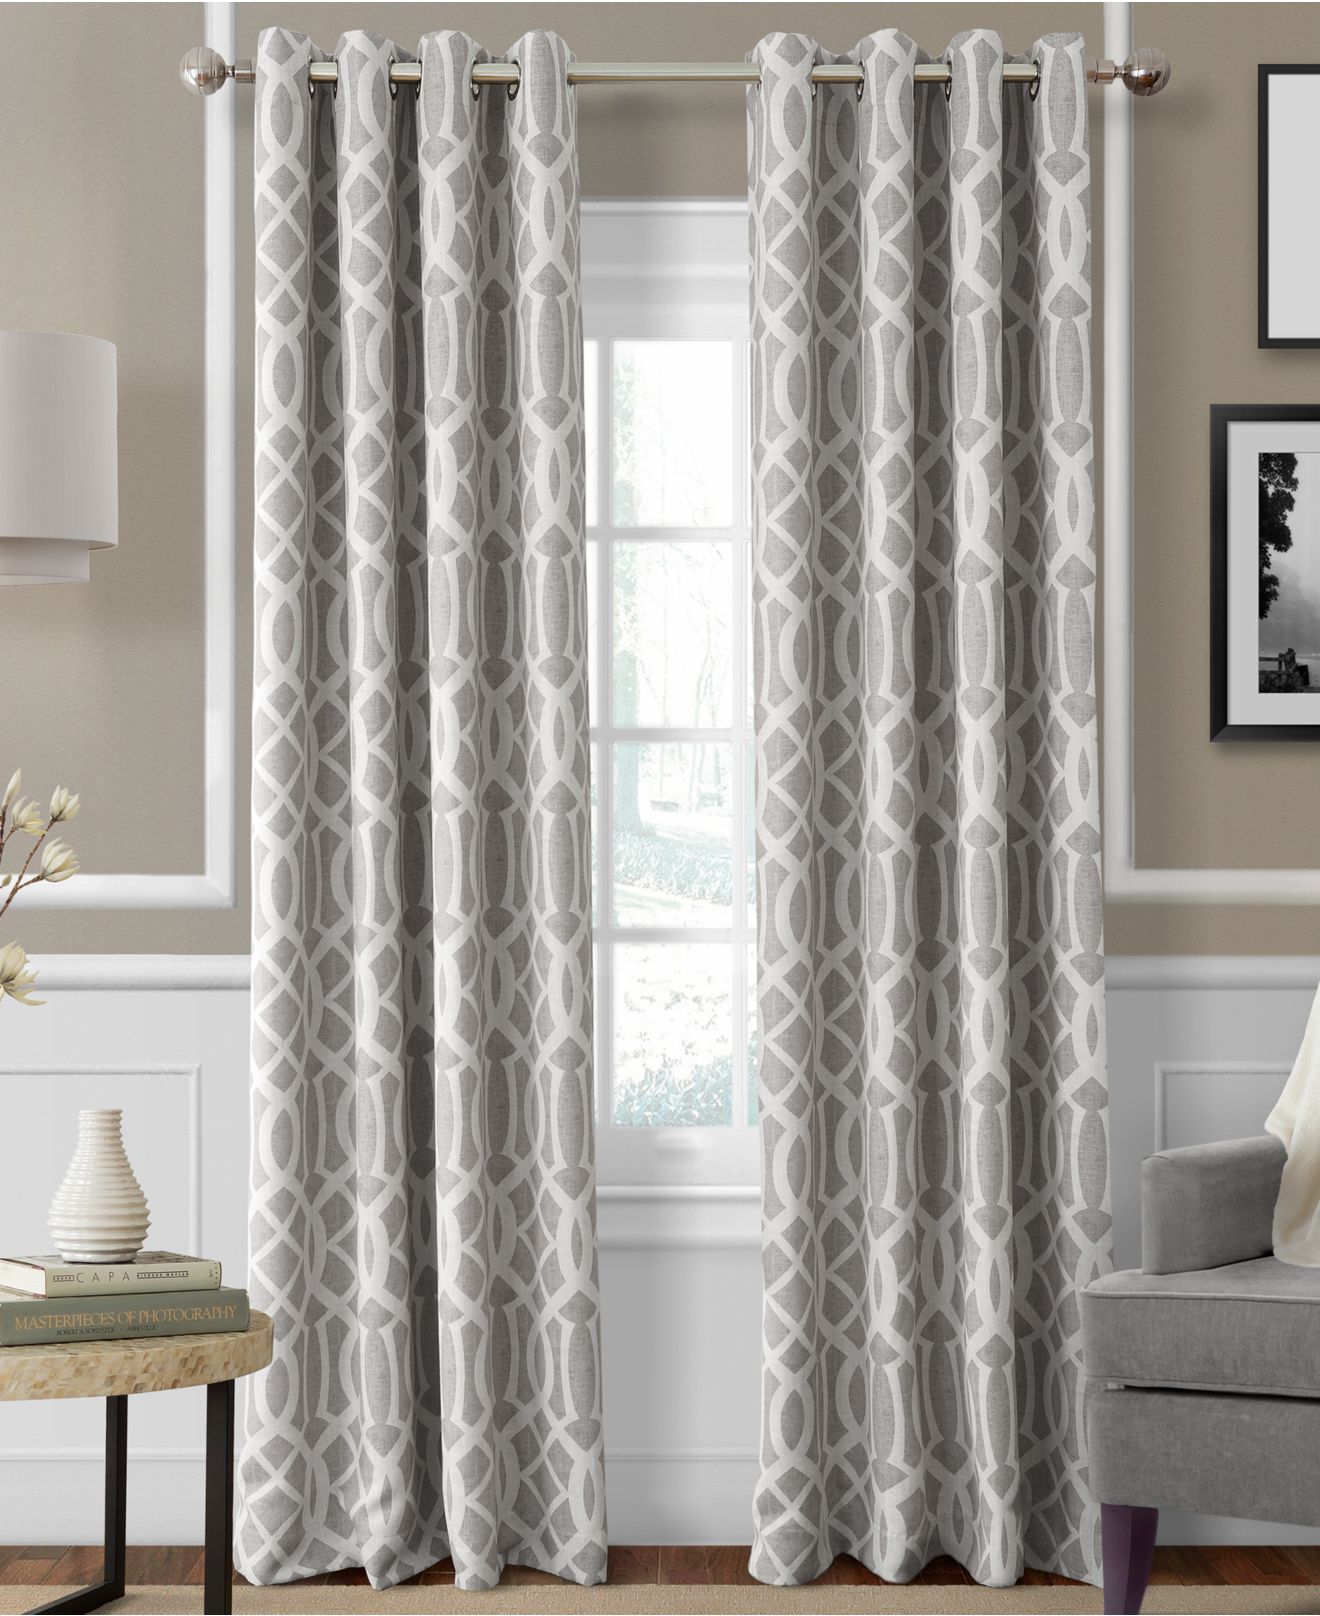 Macy Curtains For Living Room Malaysia Macy S Curtains For Living